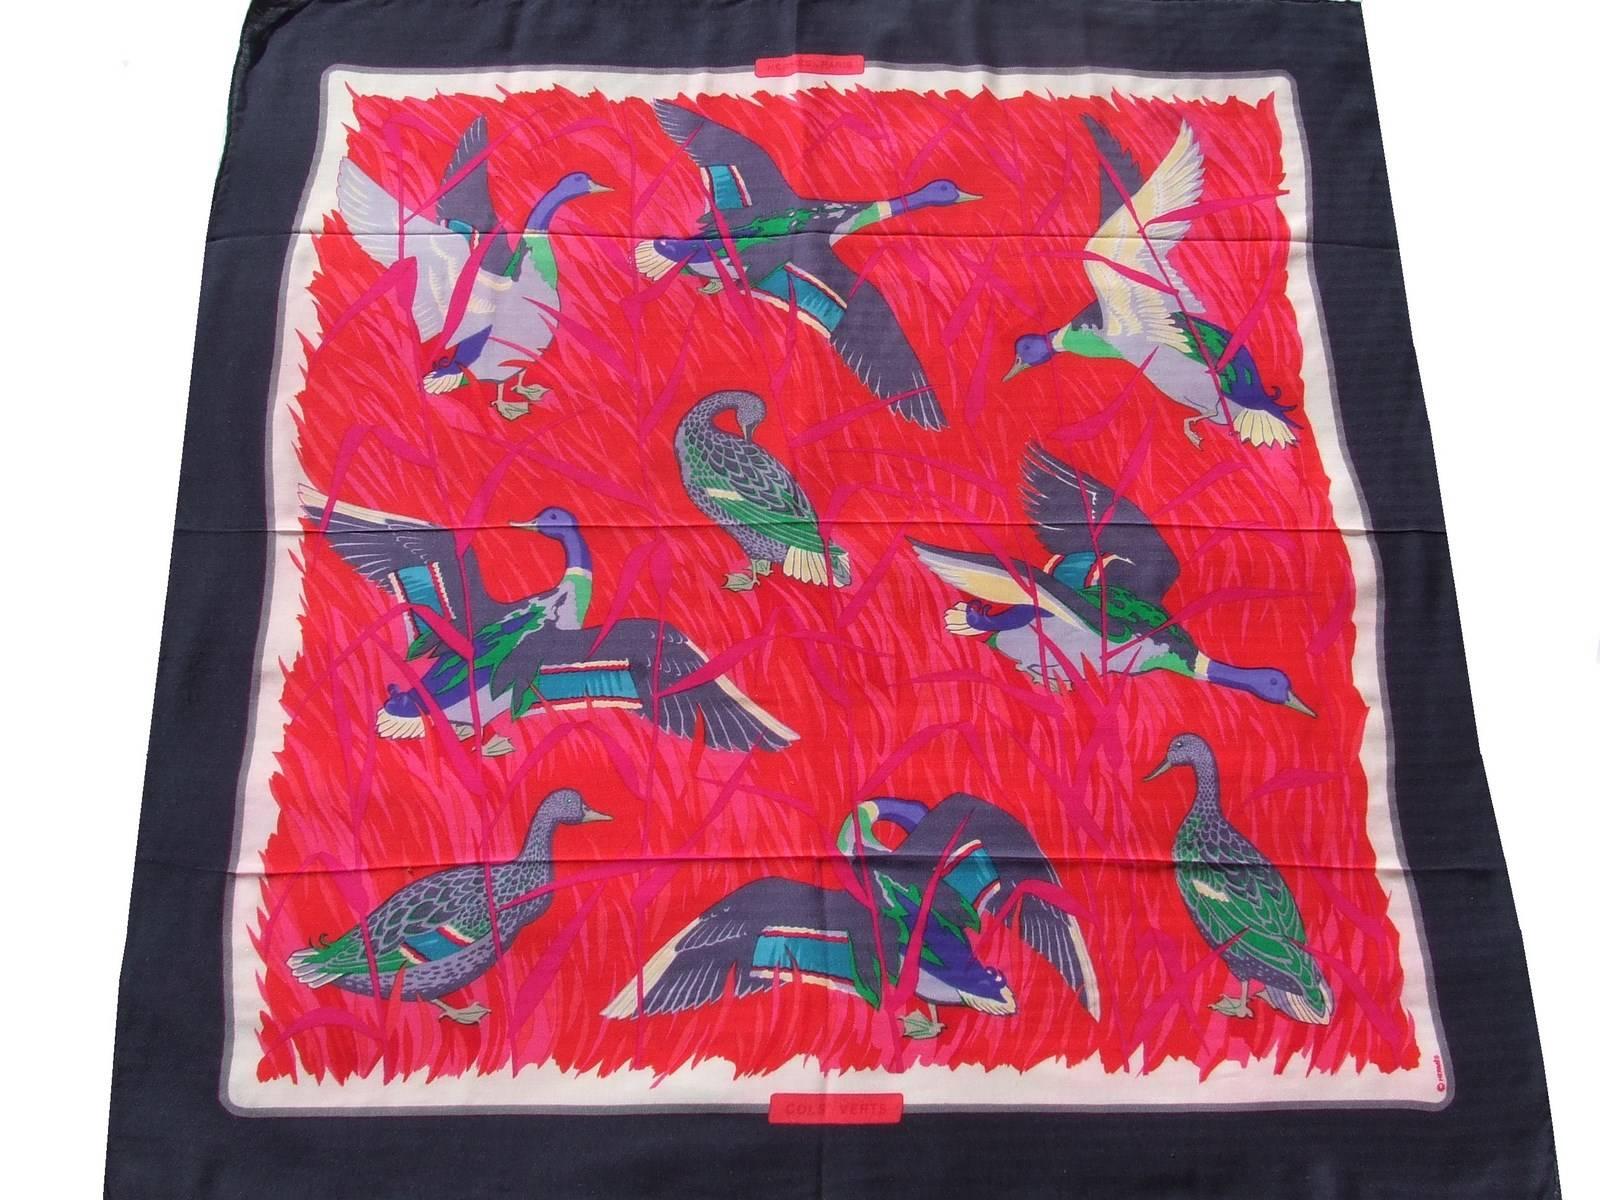 Beautiful Authentic Hermes Scarf

Pattern: Cols Verts

Made in France

Designed by Christiane Vauzelles in 1973, reissued in 1990

Made of 65% Cashmere and 35% Silk

Colorways: Navy Blue Border, Red and Pink Background, shades of Purple,